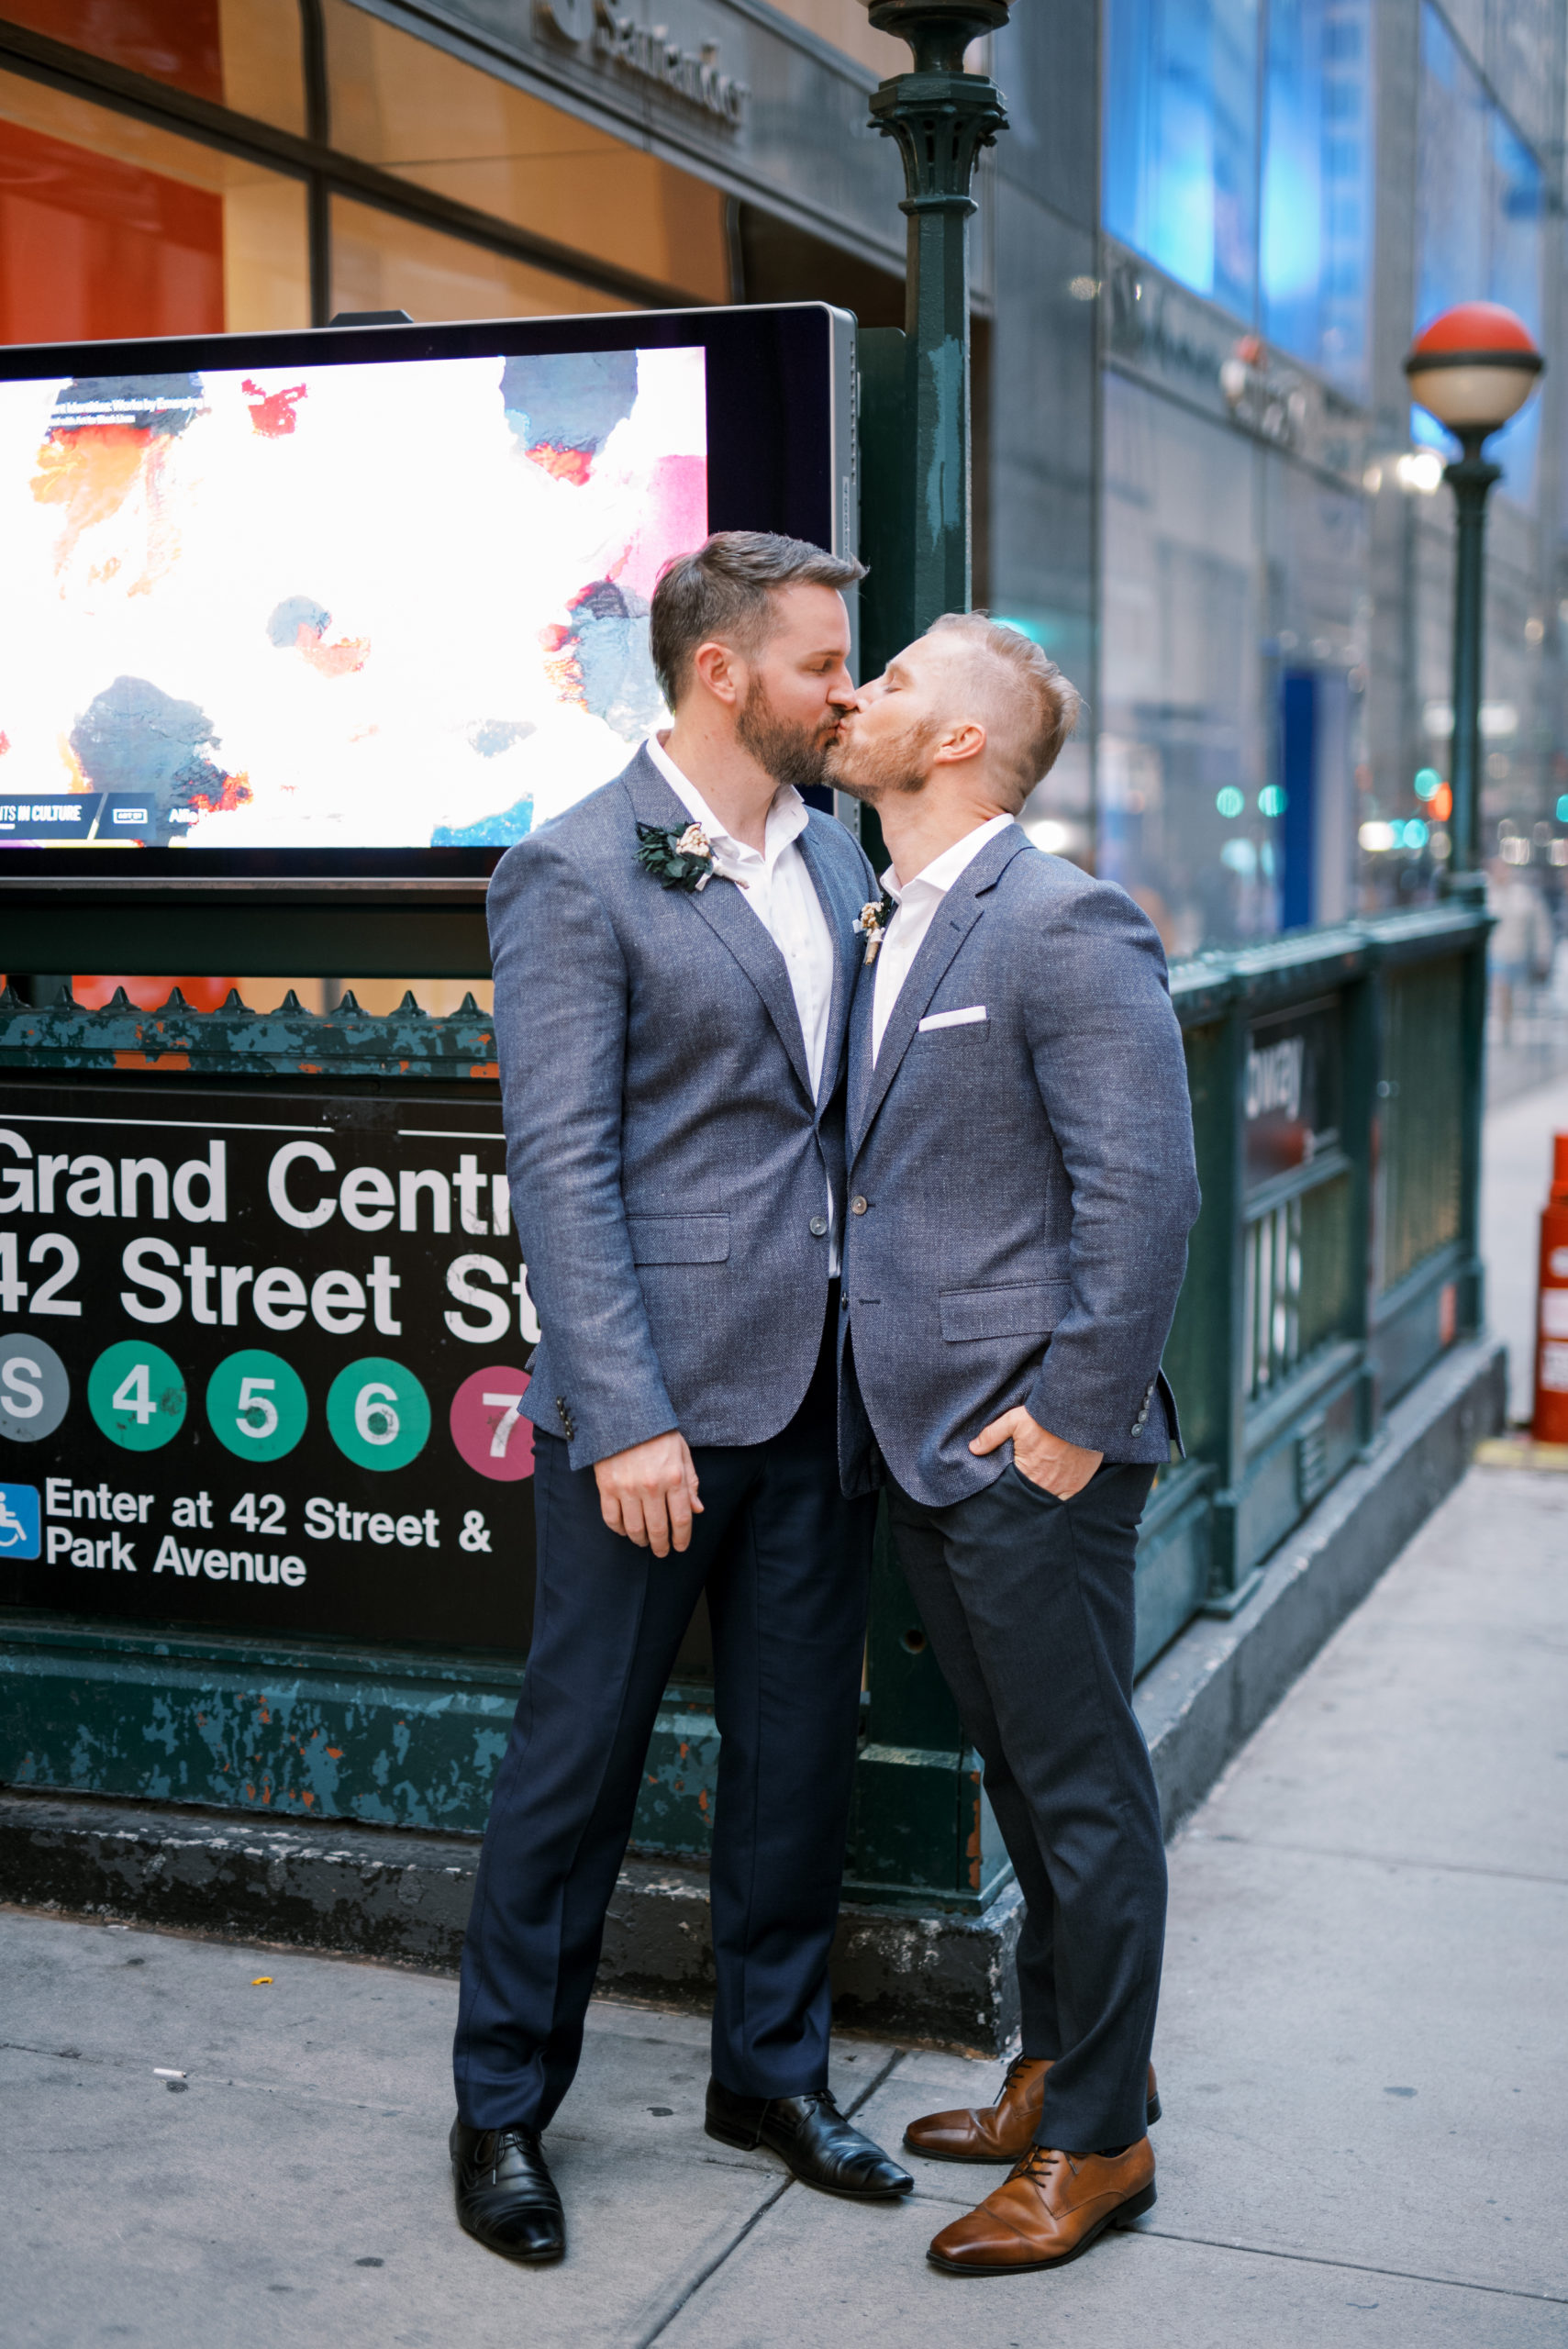 NYC Elopement, New York Public Library Wedding Photos, NYC Elopement Photographer, Anna Gianfrate Photography